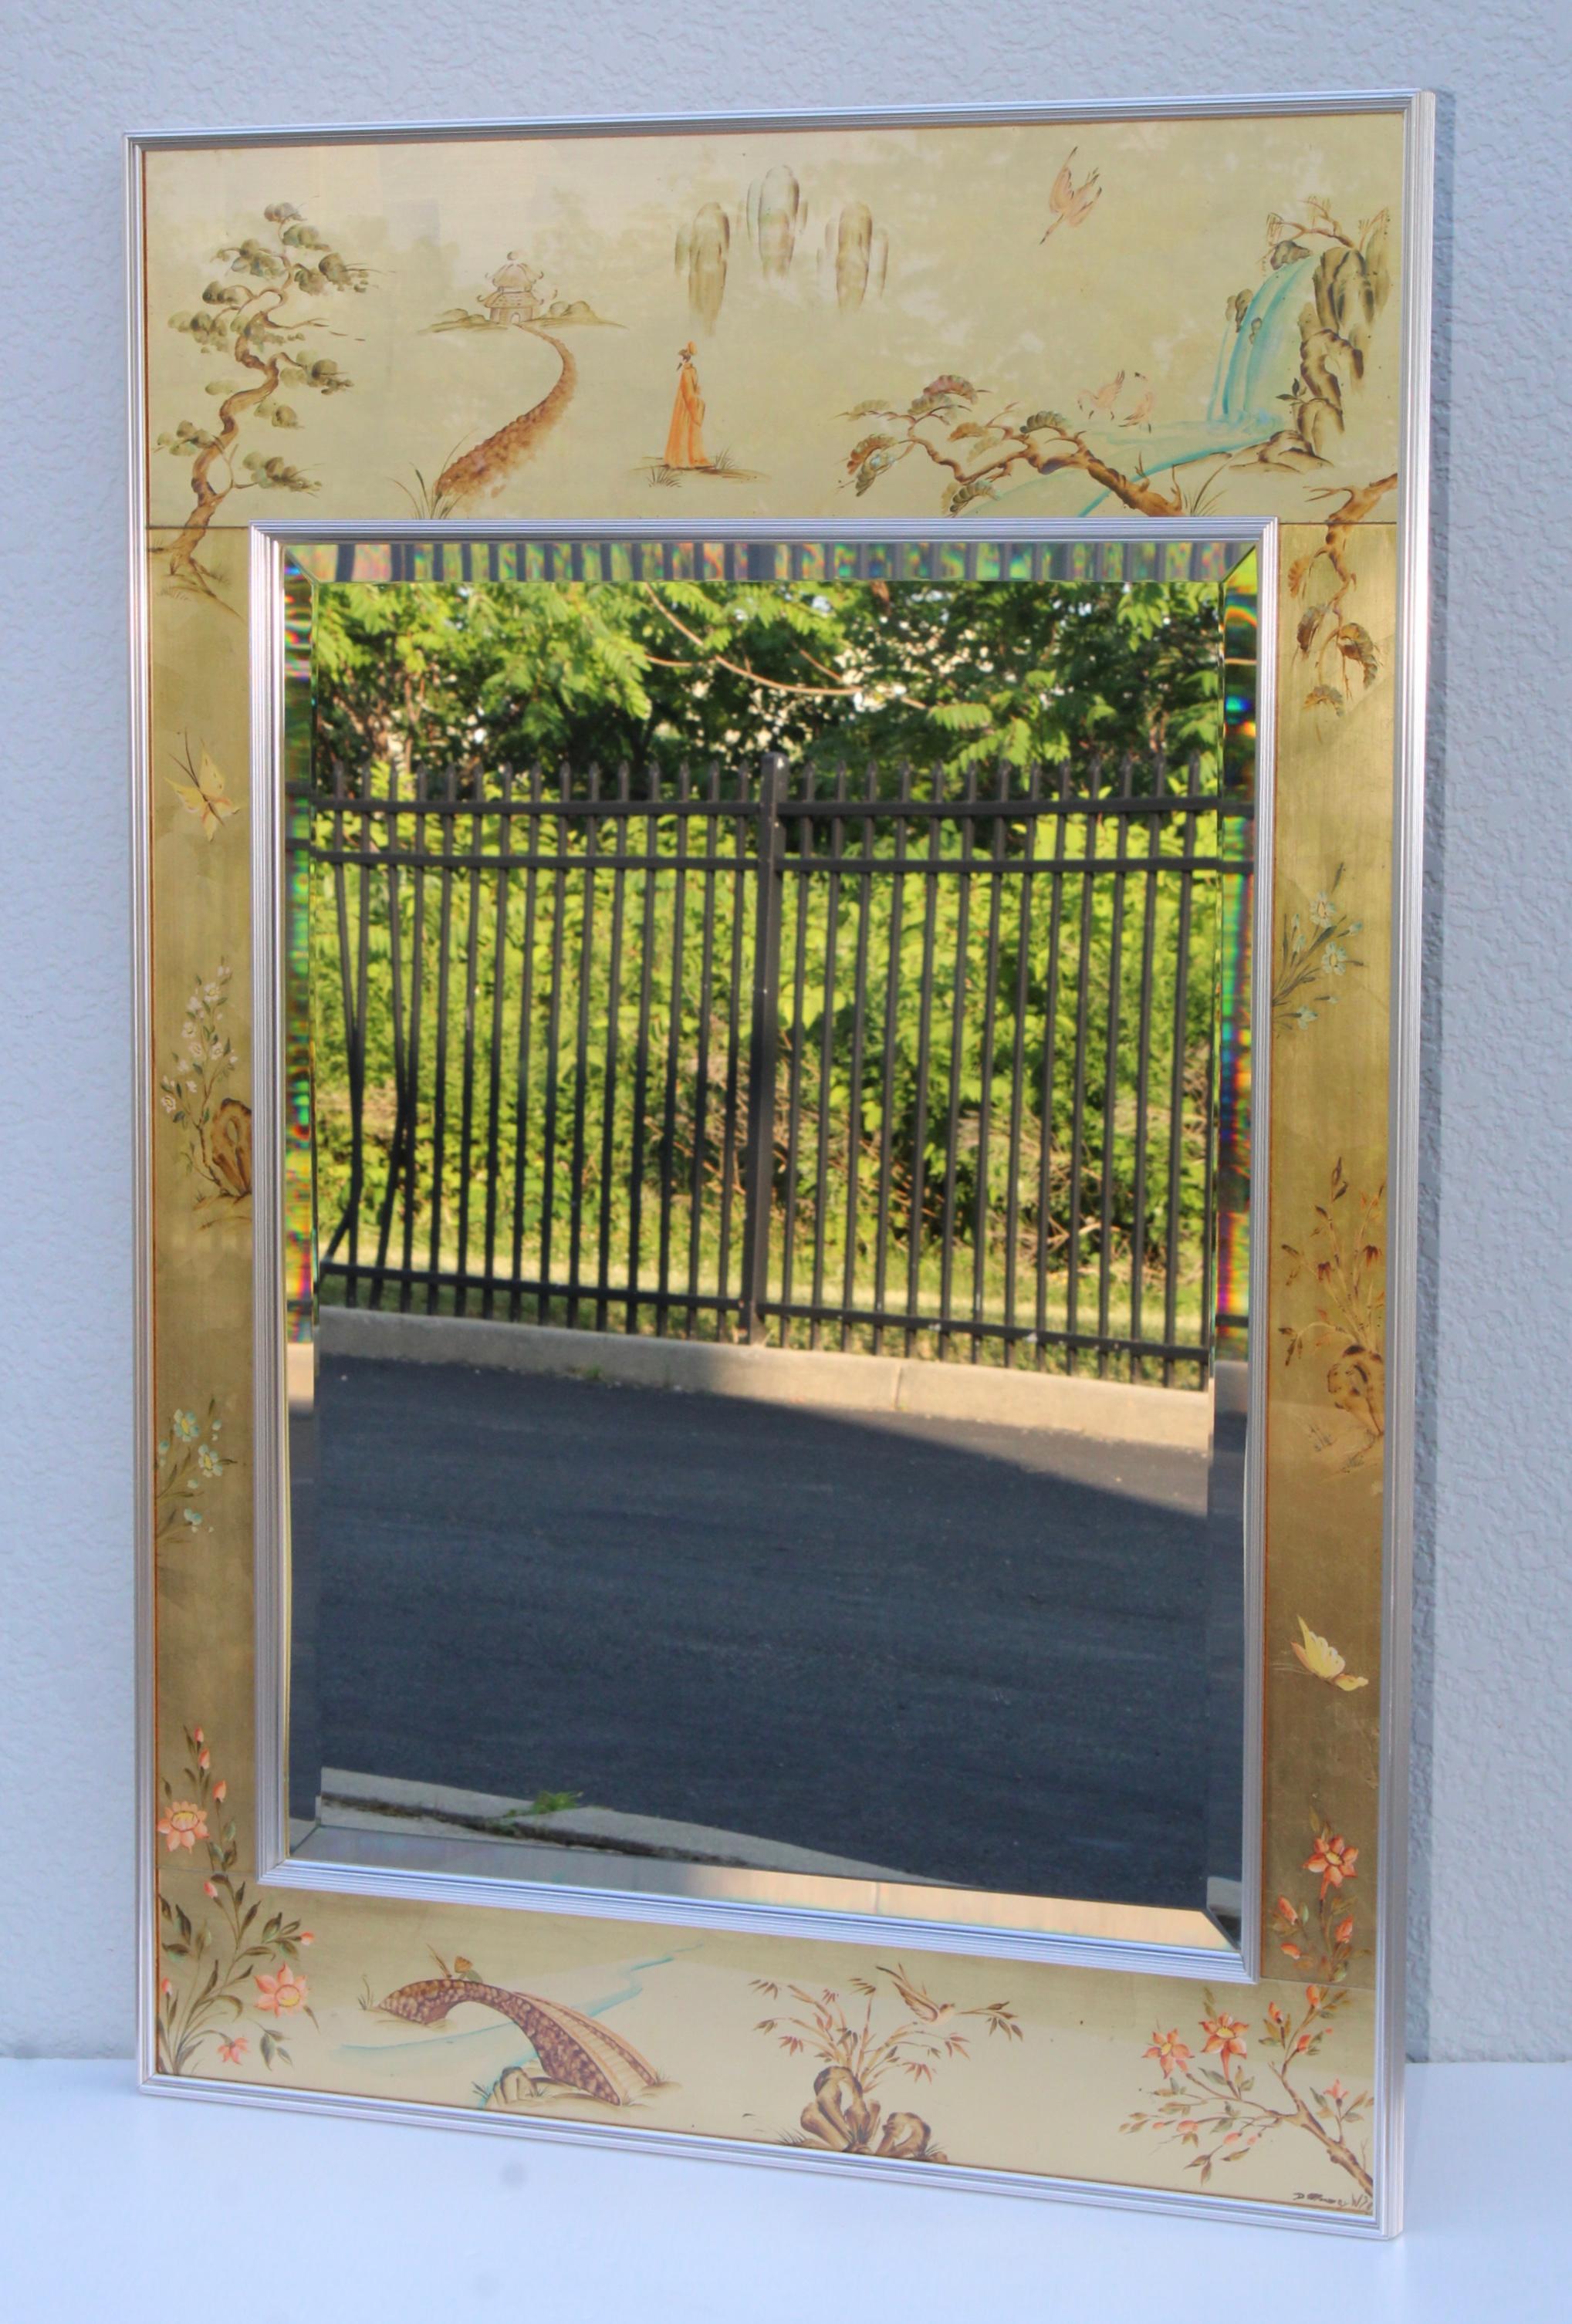 1970s hand painted chinoiserie mirror by La Barge.